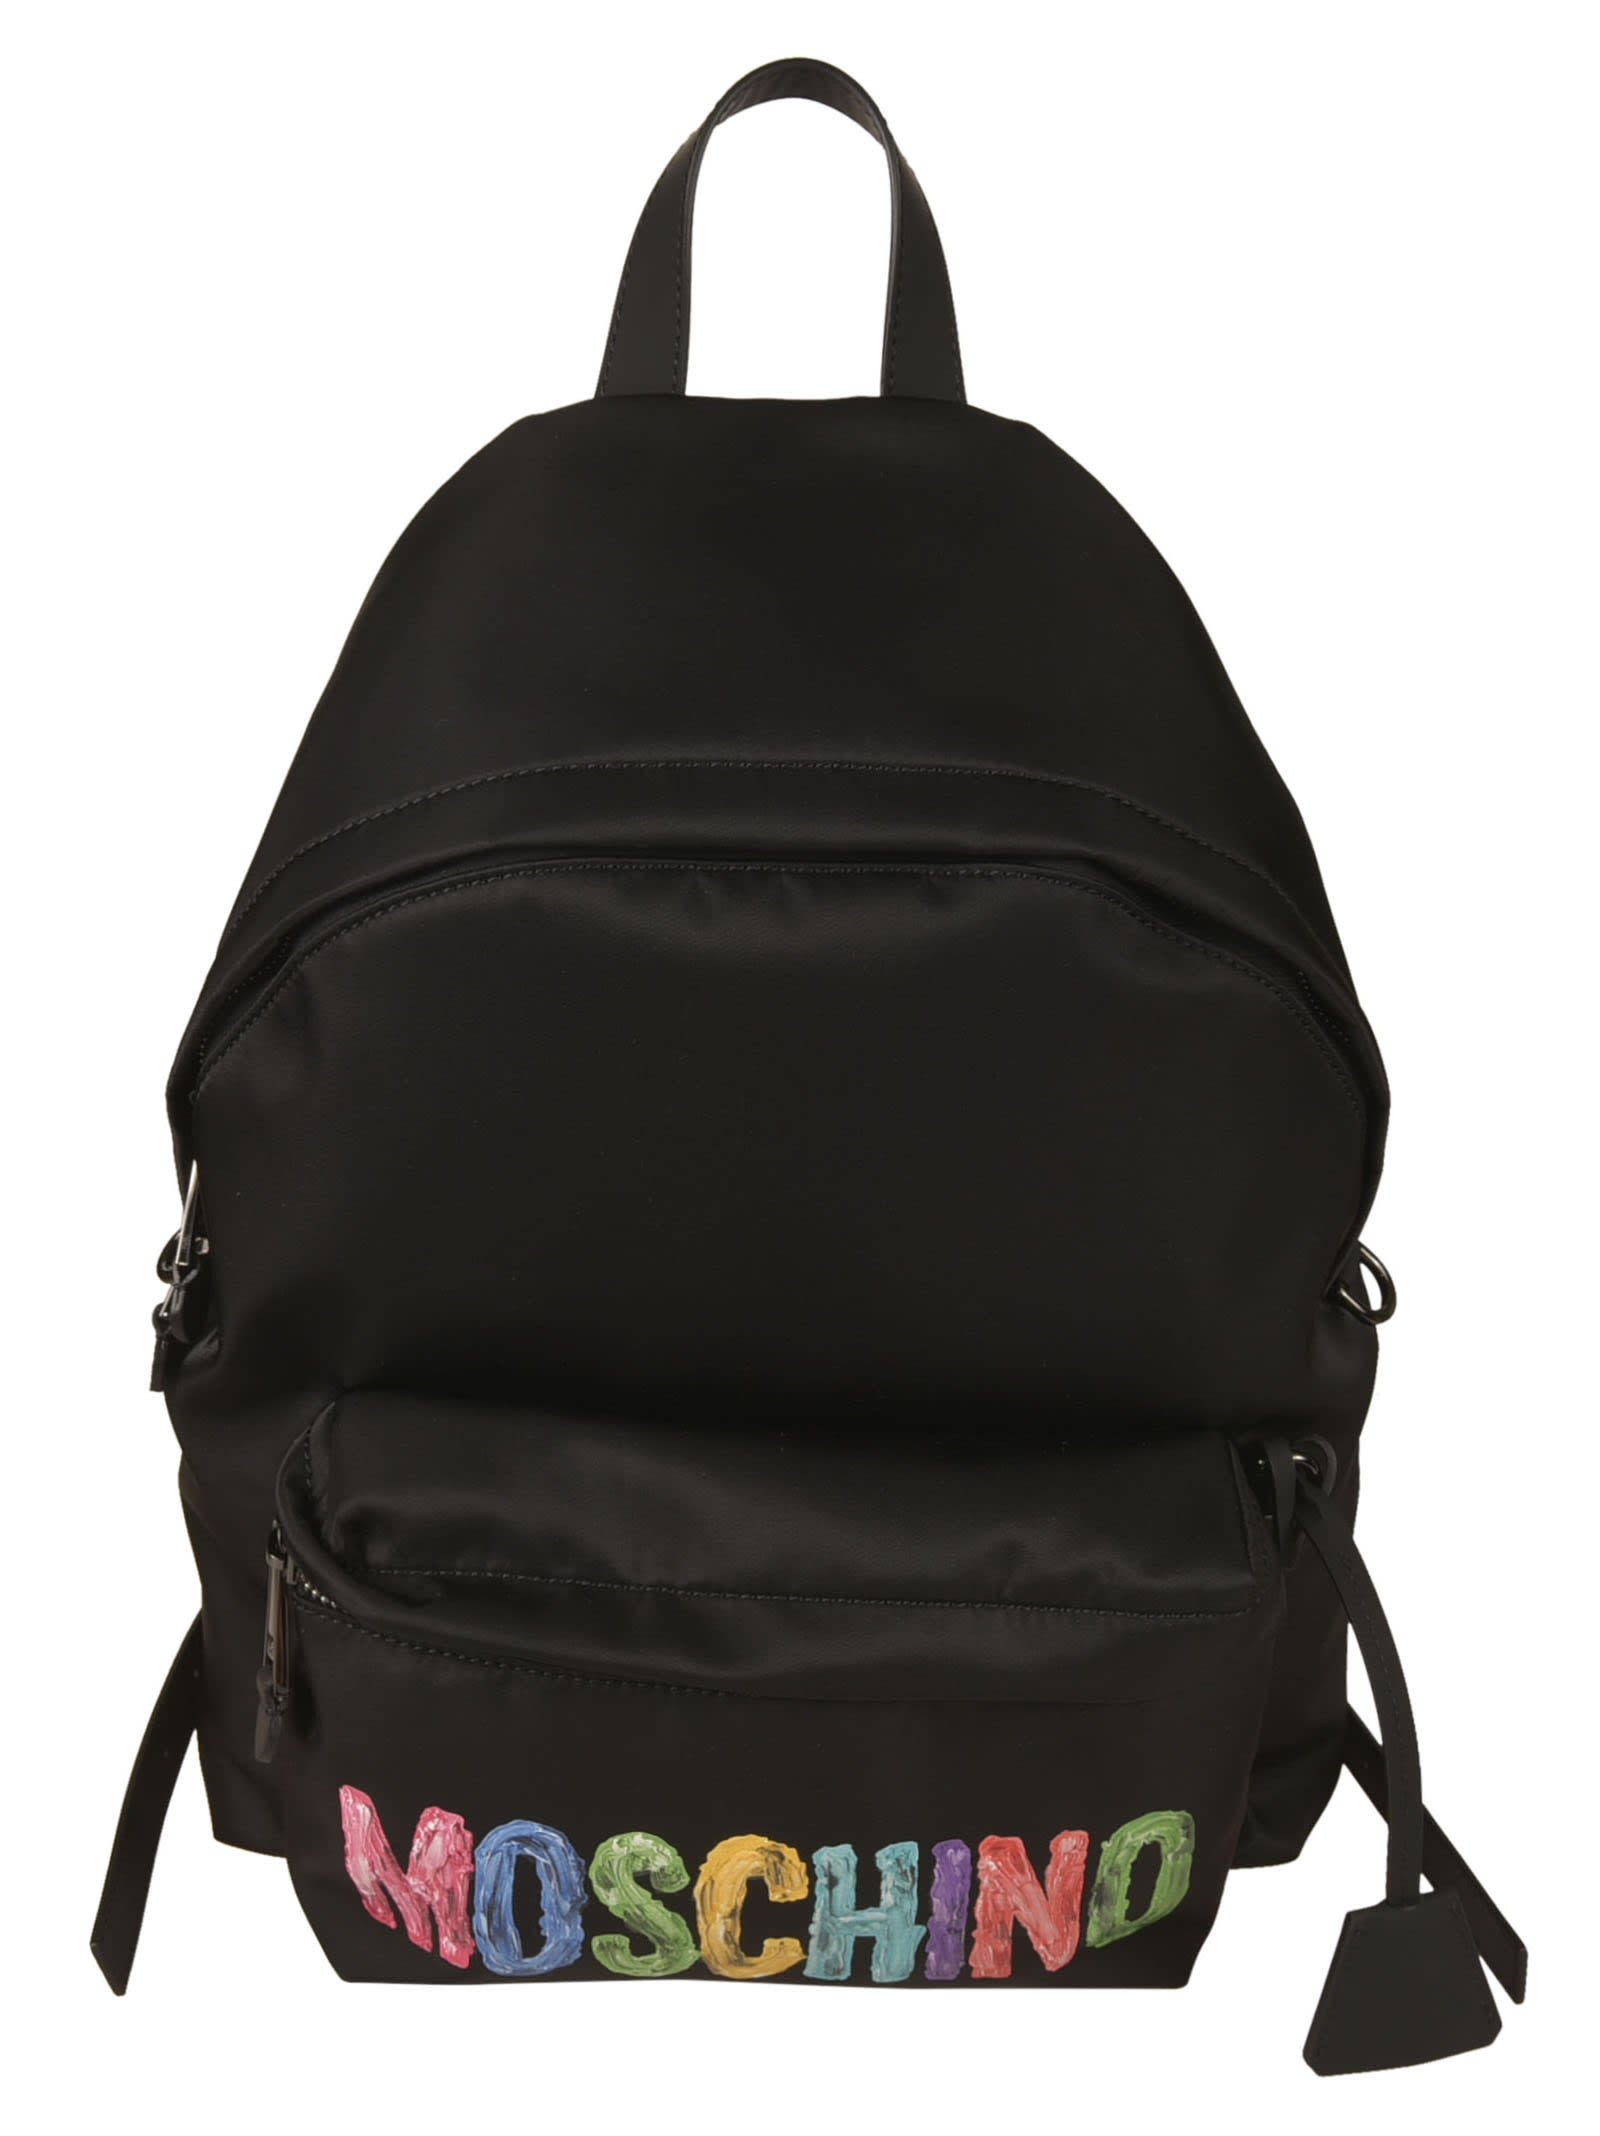 Moschino Multicolored Logo Backpack